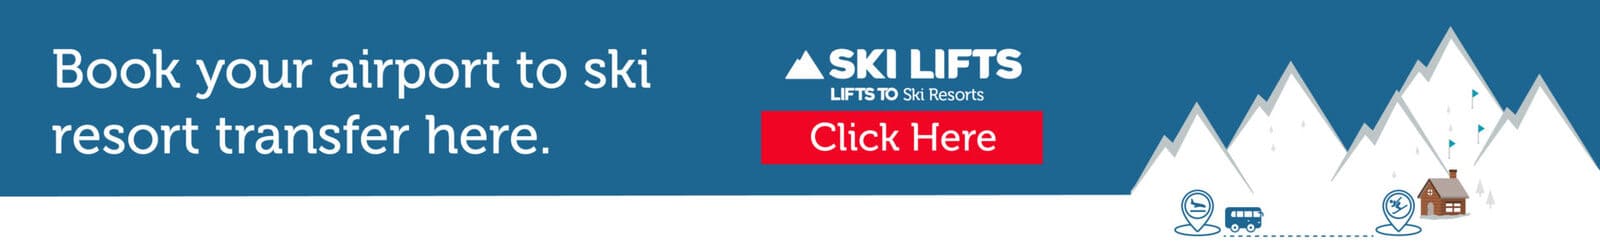 Book your airport to ski resort transfer here